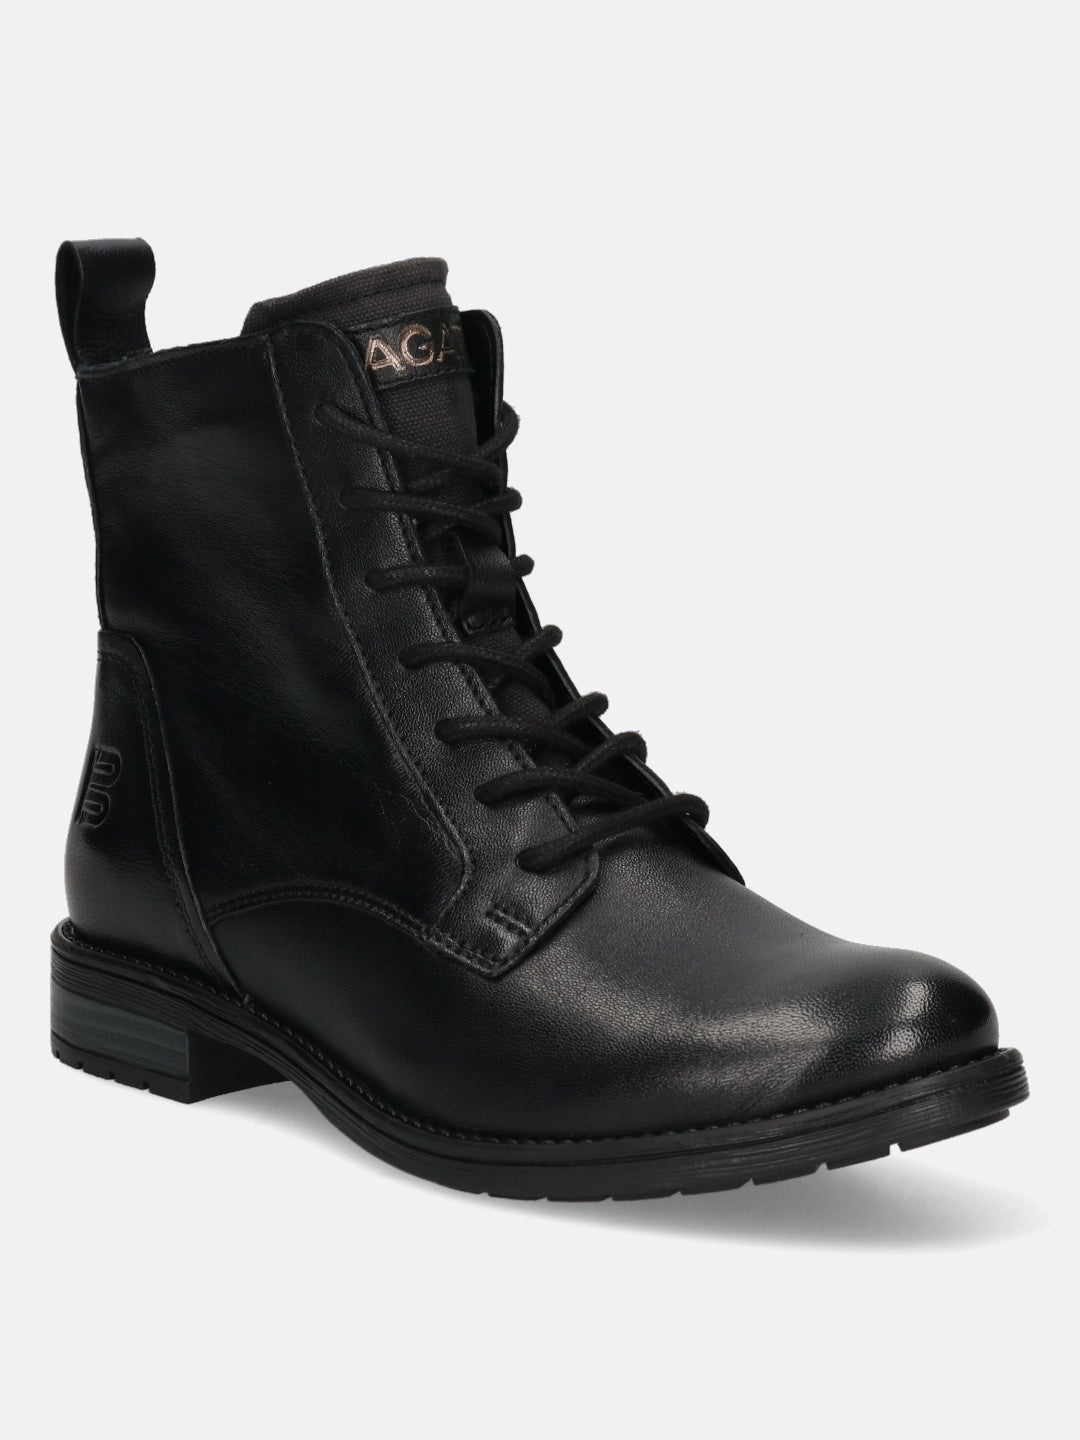 Ronja I Black Leather Ankle Boots